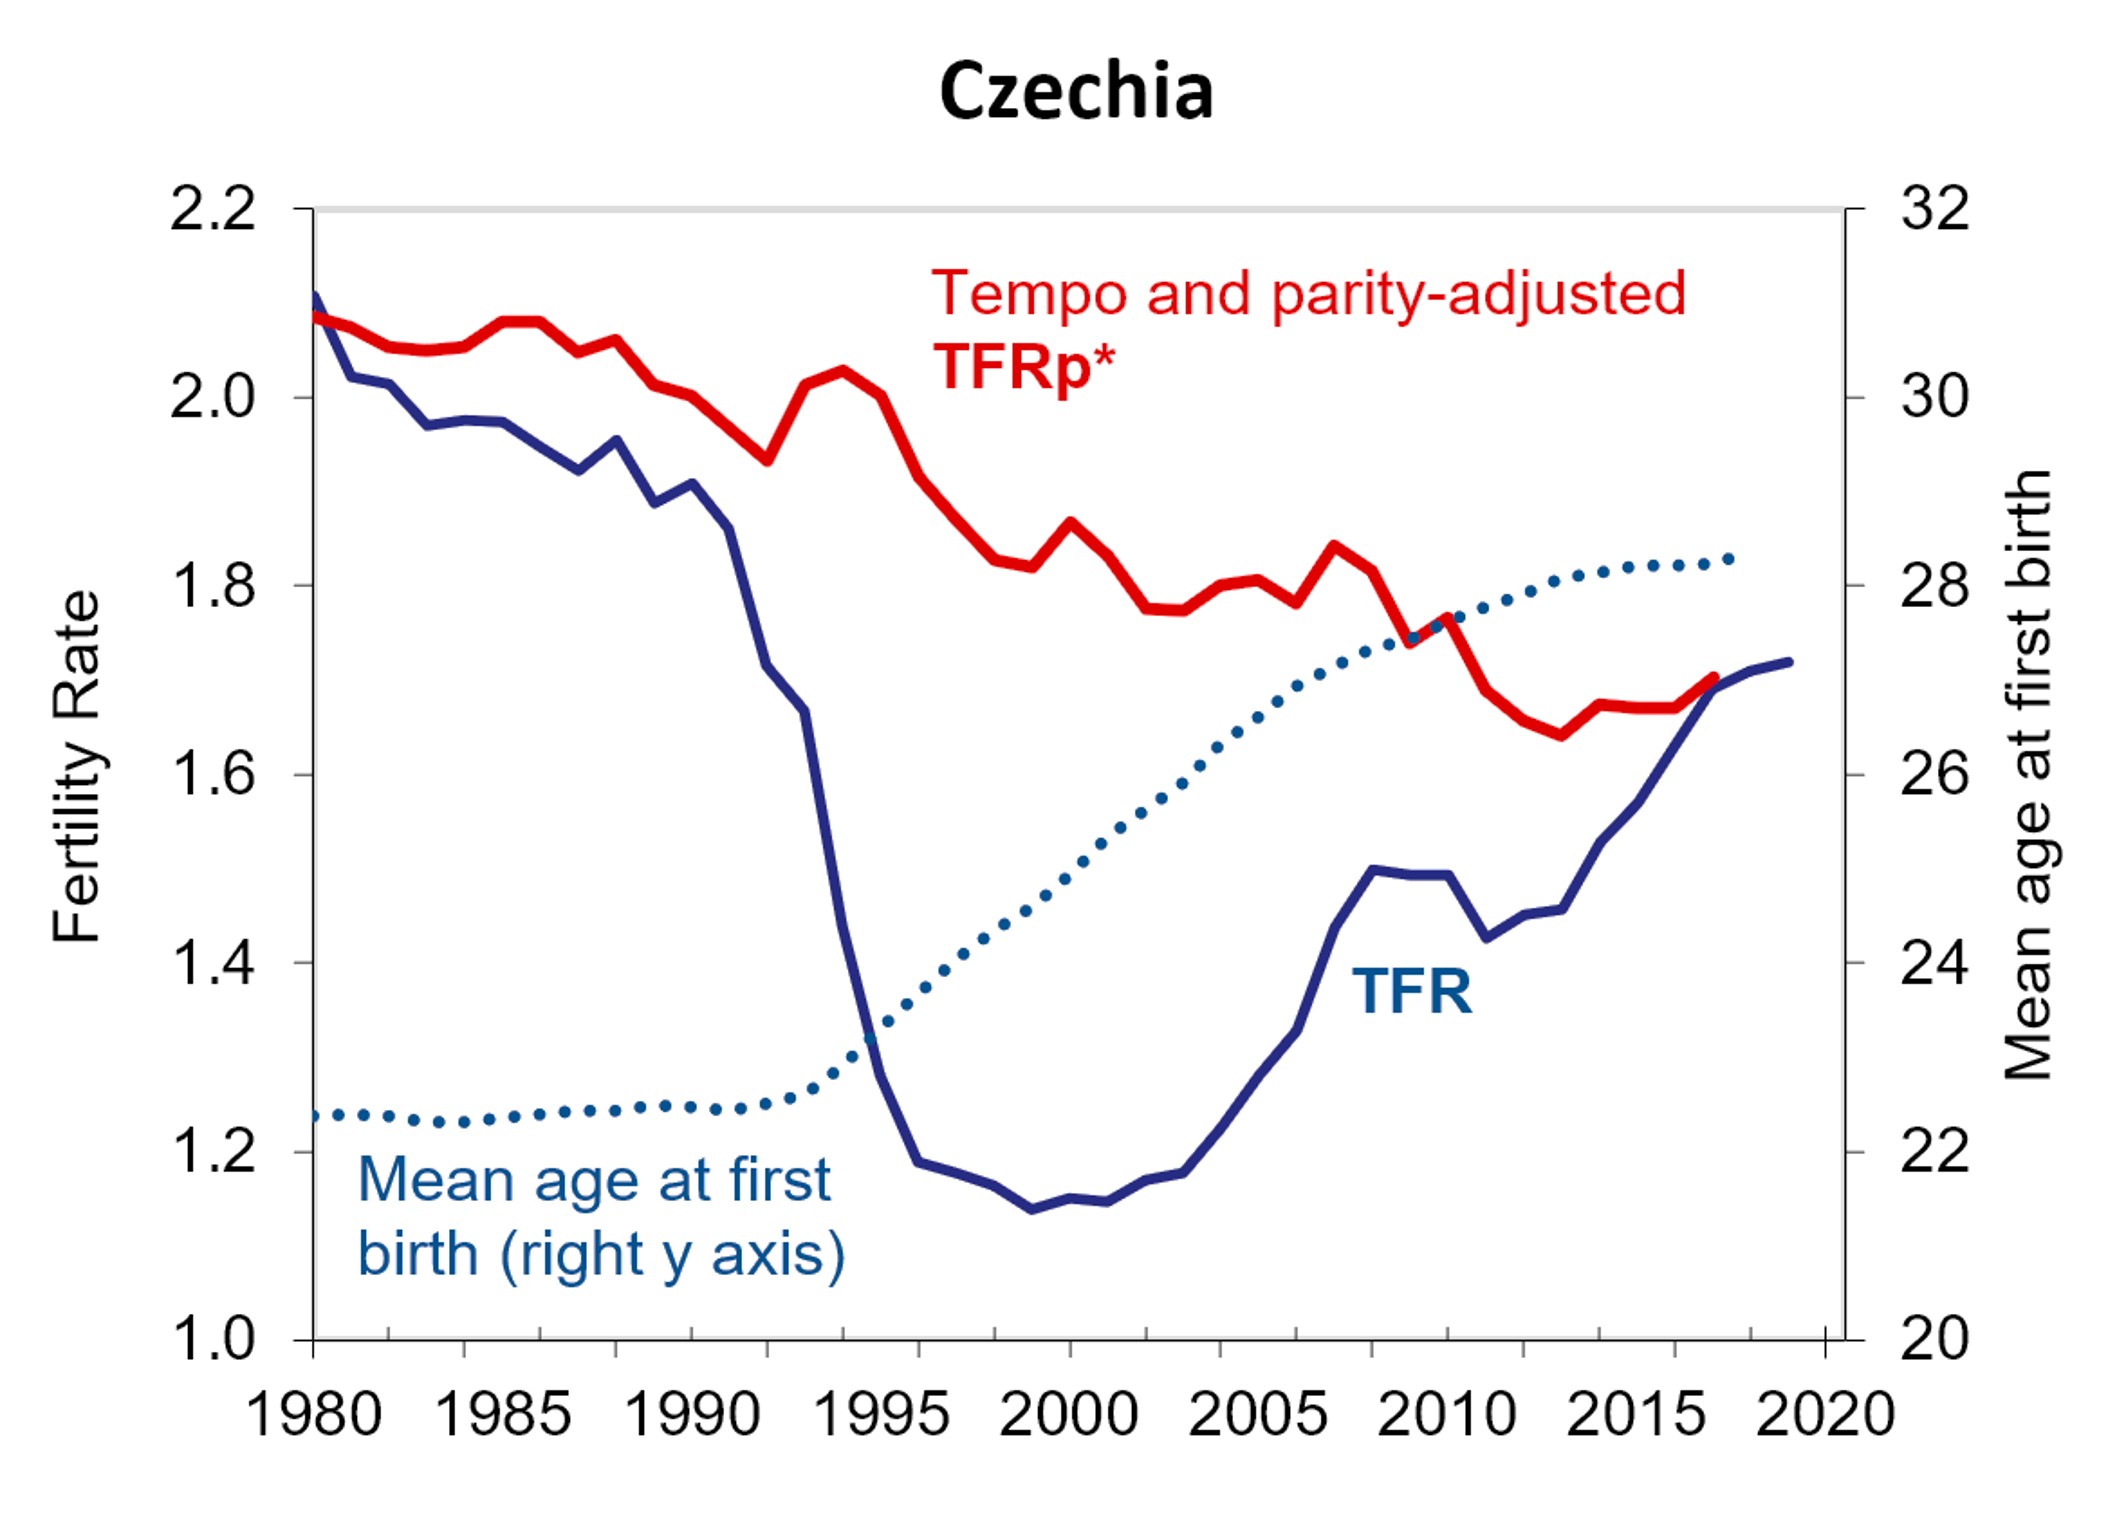 This graph shows the estimated number of children per Czech woman on the vertical axis at left. On the horizontal axis is the year, ranging from 1980 to 2020. The TFR line is dark blue. It falls from a high of 2.1 in 1980 to about 1.1 in 2000, then rises to about 1.45 in 2010 and, after a decline, continues upward to about 1.7 in 2015. By contrast, TFRp*, shown in red, declines gradually, with some ups and downs, from 2.1 in 1980 to 1.7 in 2015. The Figure also includes a dotted line showing the mean age of mothers at first birth, which increases at a decreasing rate, beginning in the early 1990s.